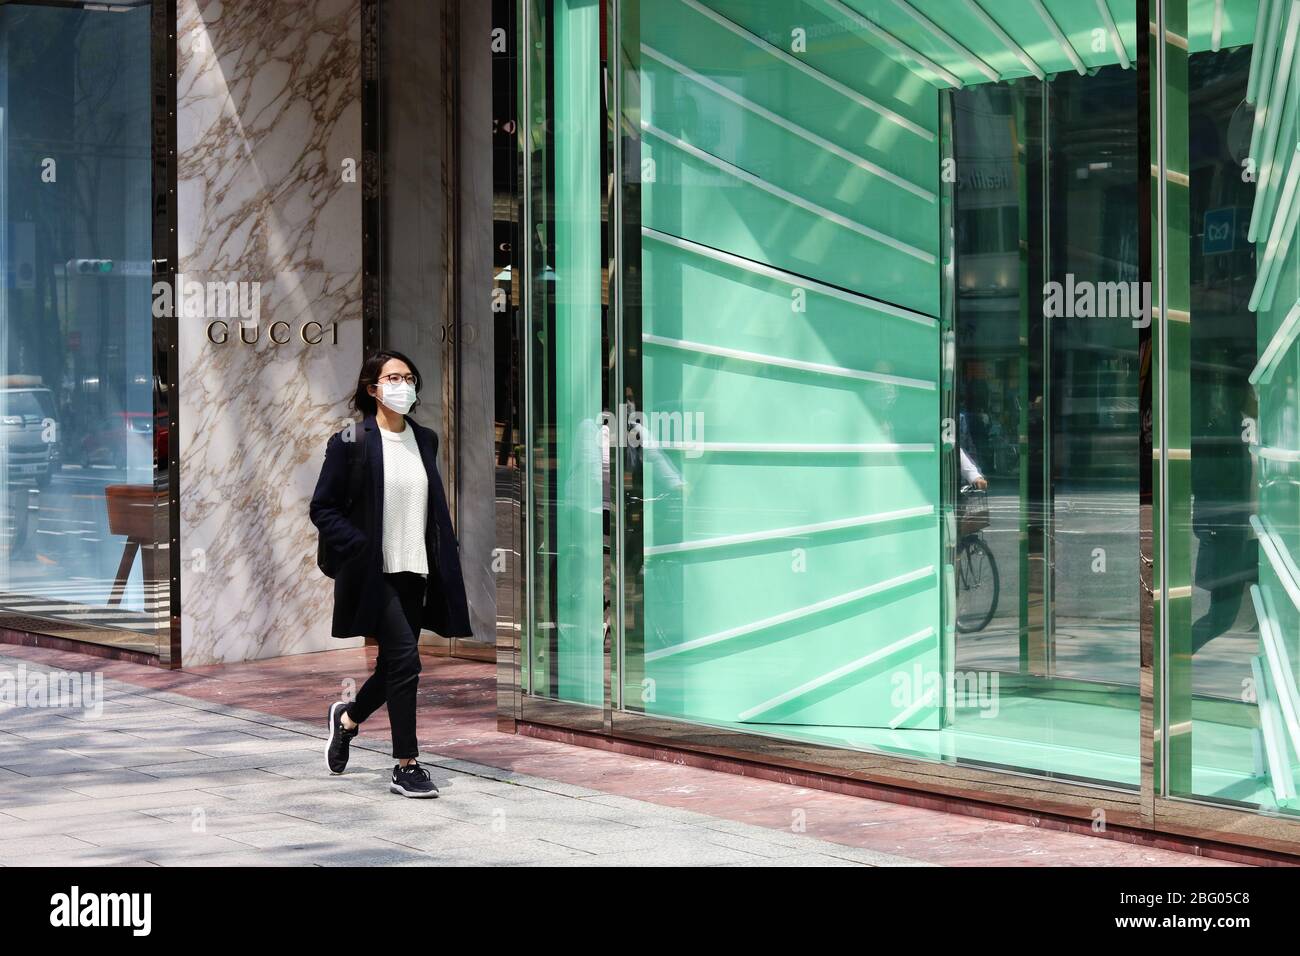 Tokyo: Gucci flagship store relocation, superfuture®